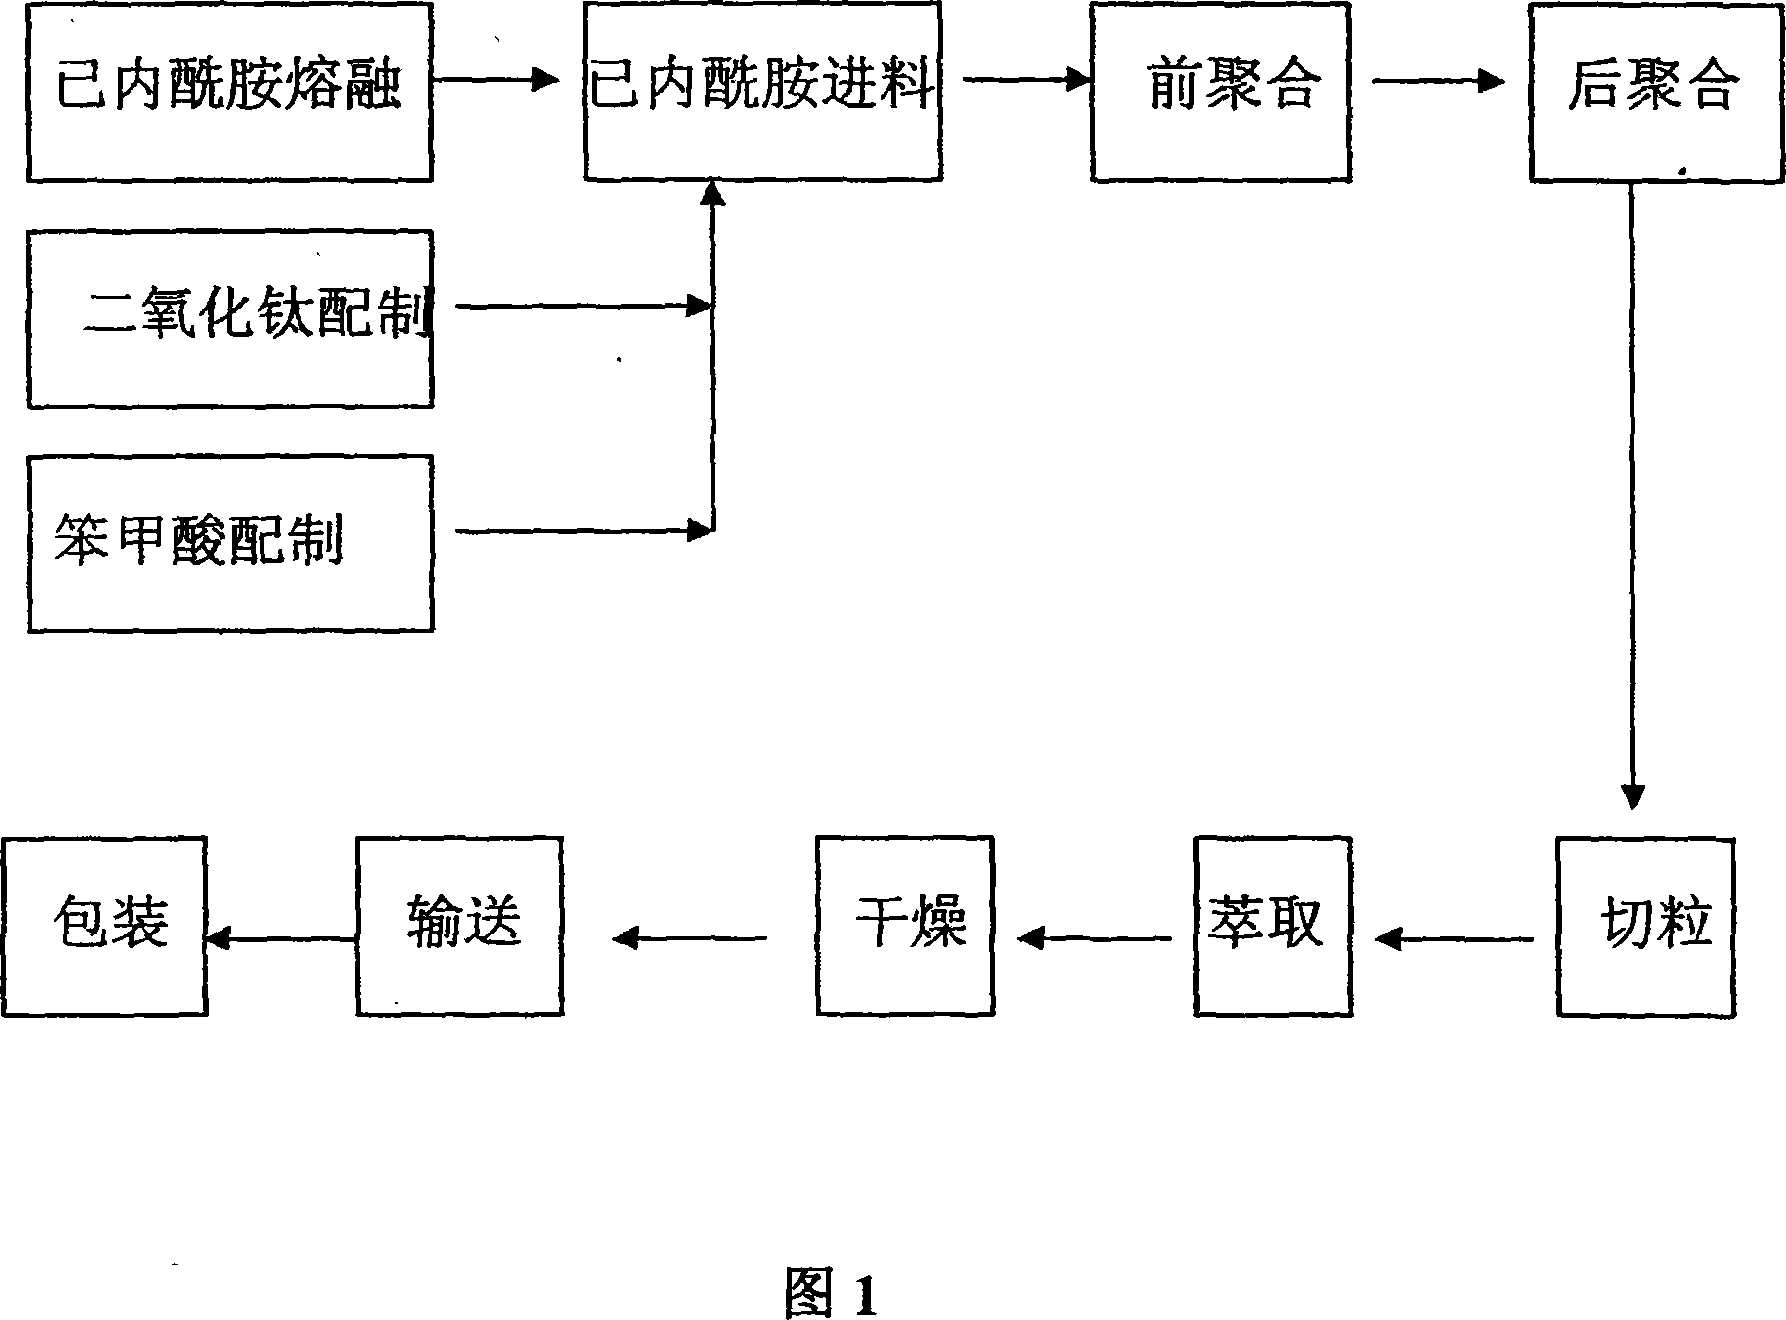 Production technique and equipment for polymerizing polyamide